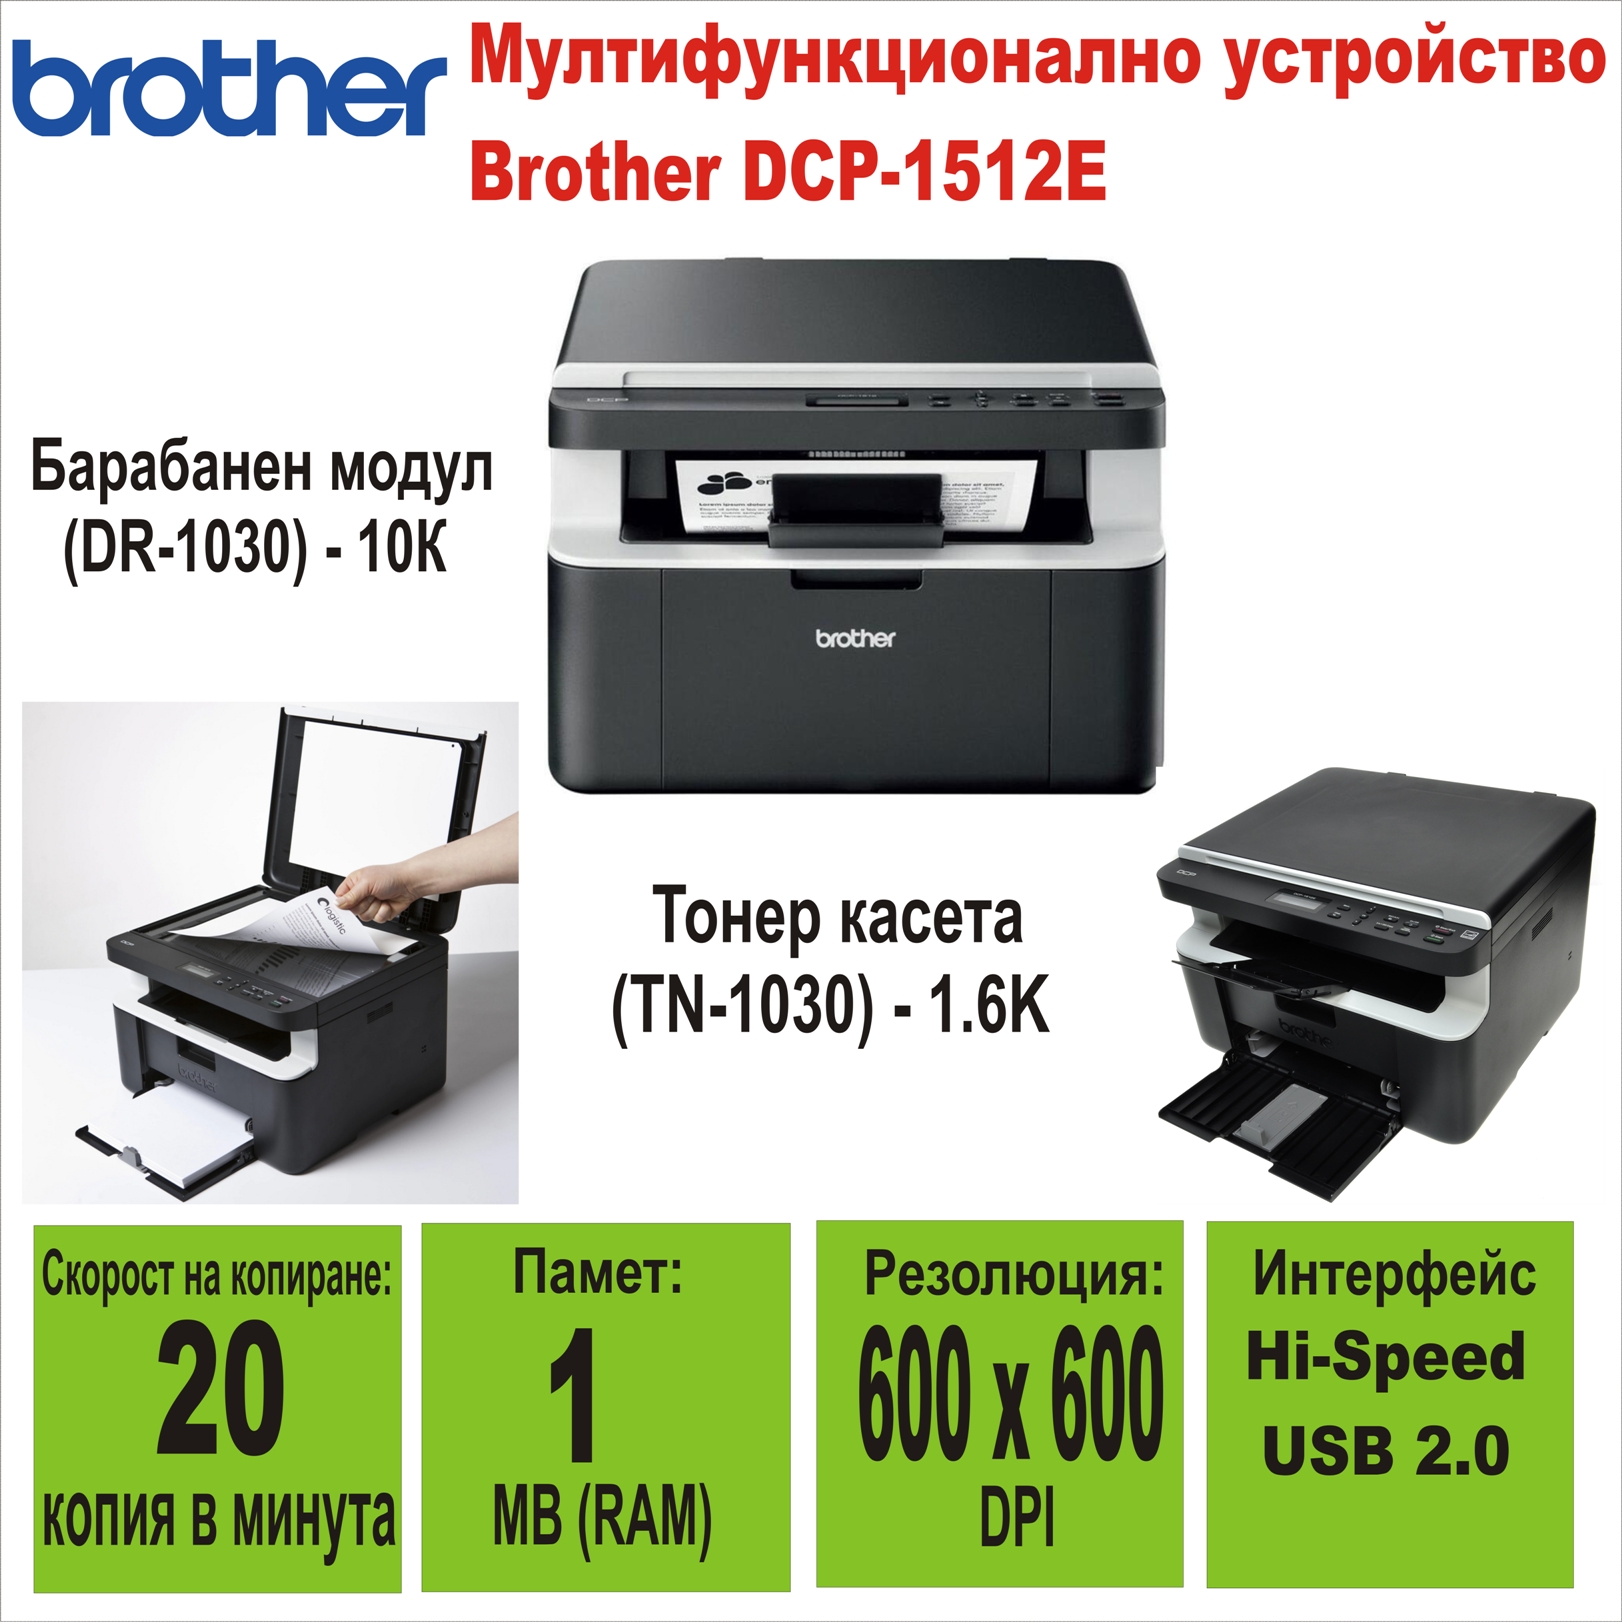 All-in-One Mono Brother DCP-1512E